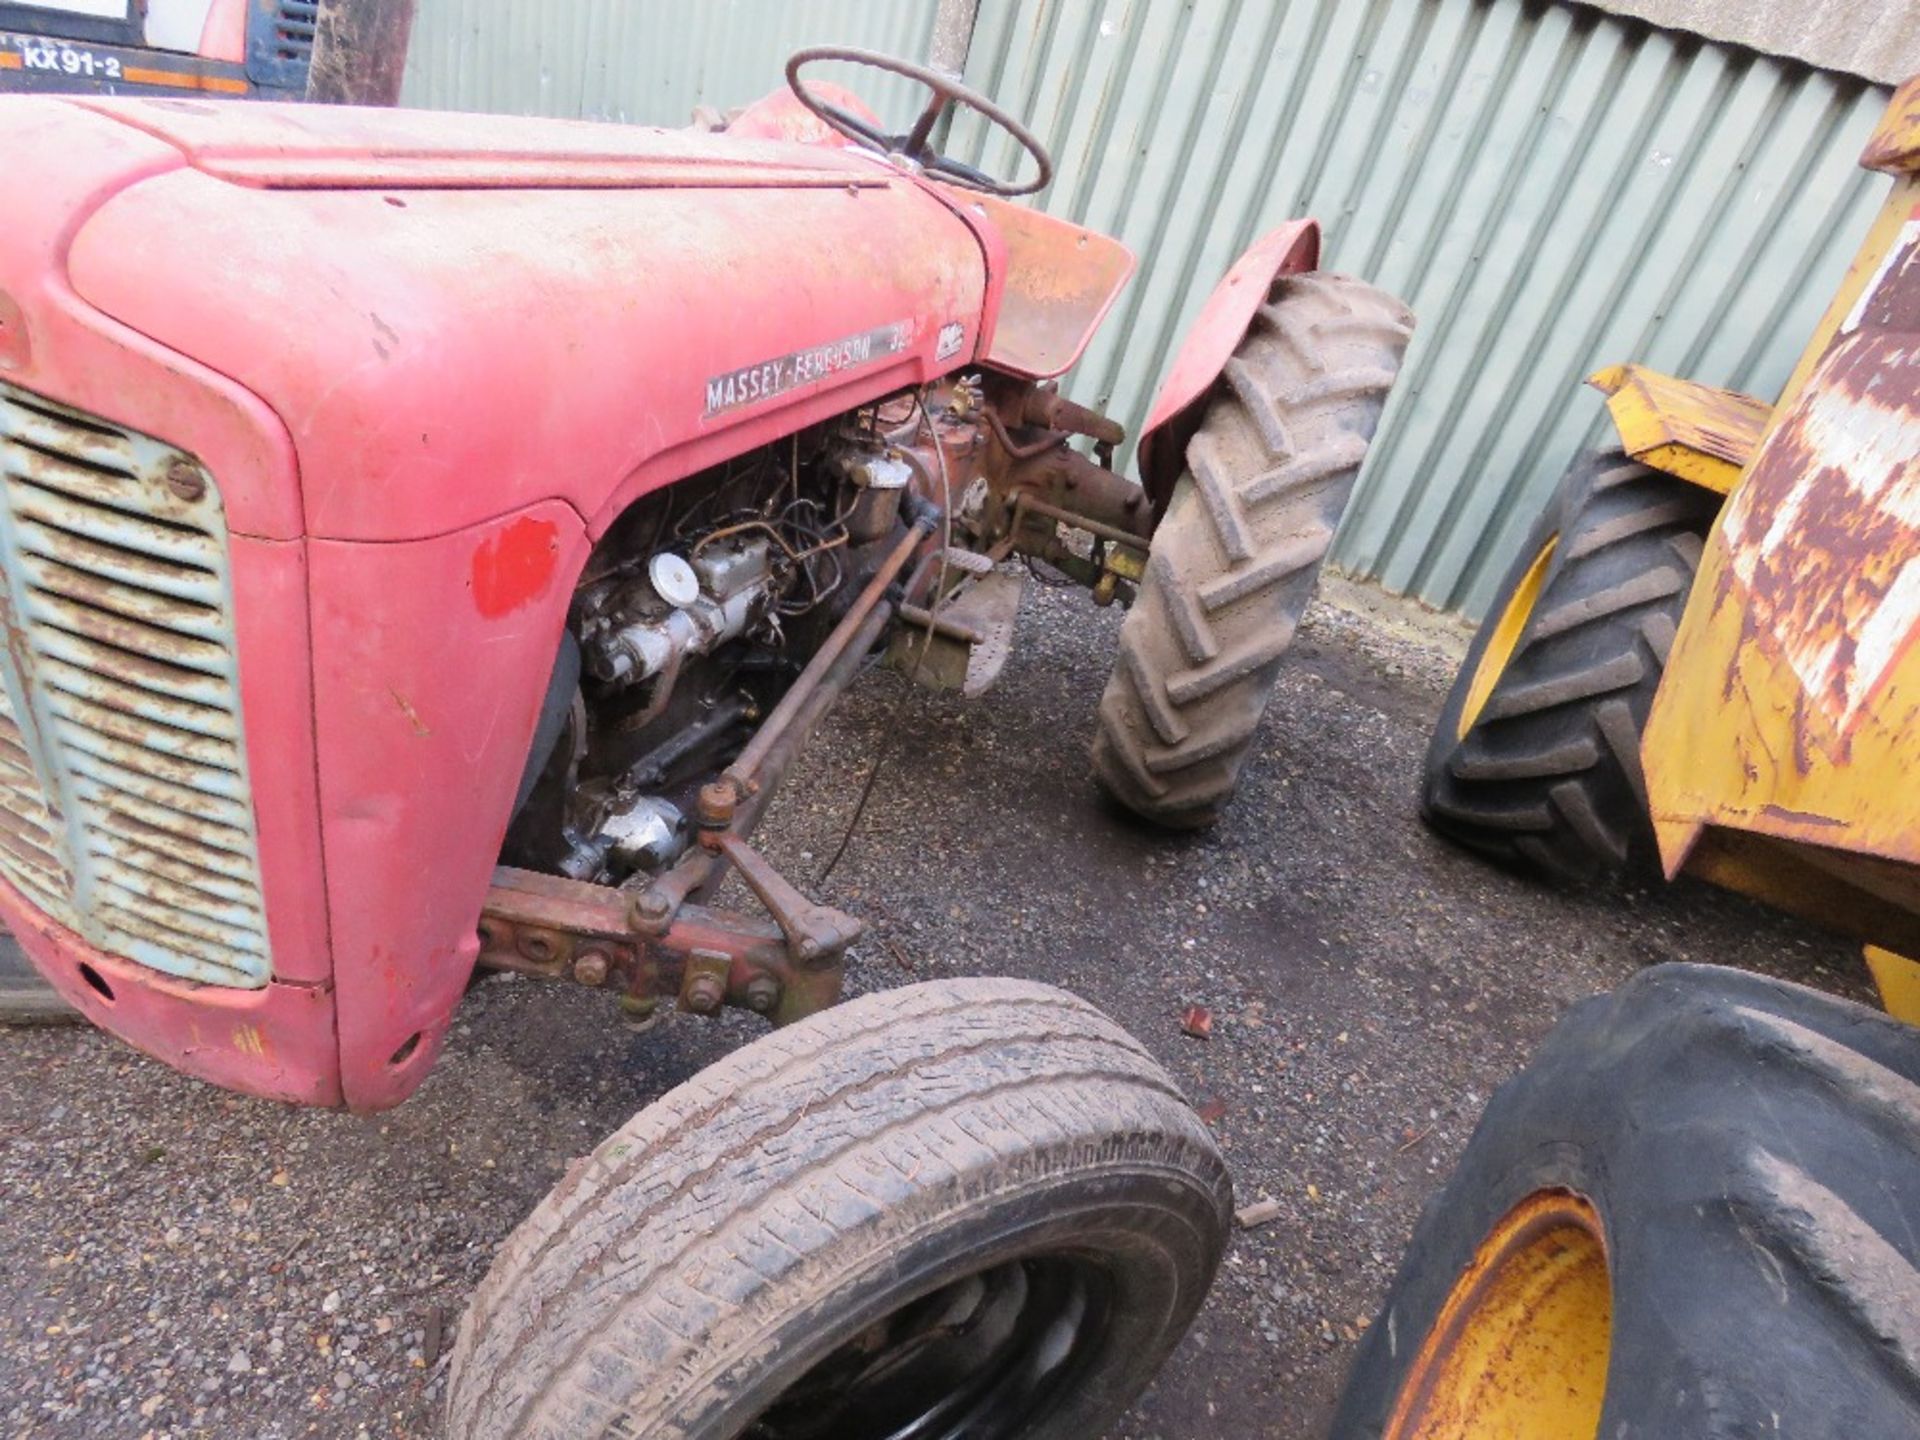 MASSEY FERGUSON 35 4 CYLINDER TRACTOR. BRIEF TESTING BY PUSHING SAW THE ENGINE TURN OVER AND TRY TO - Image 2 of 7